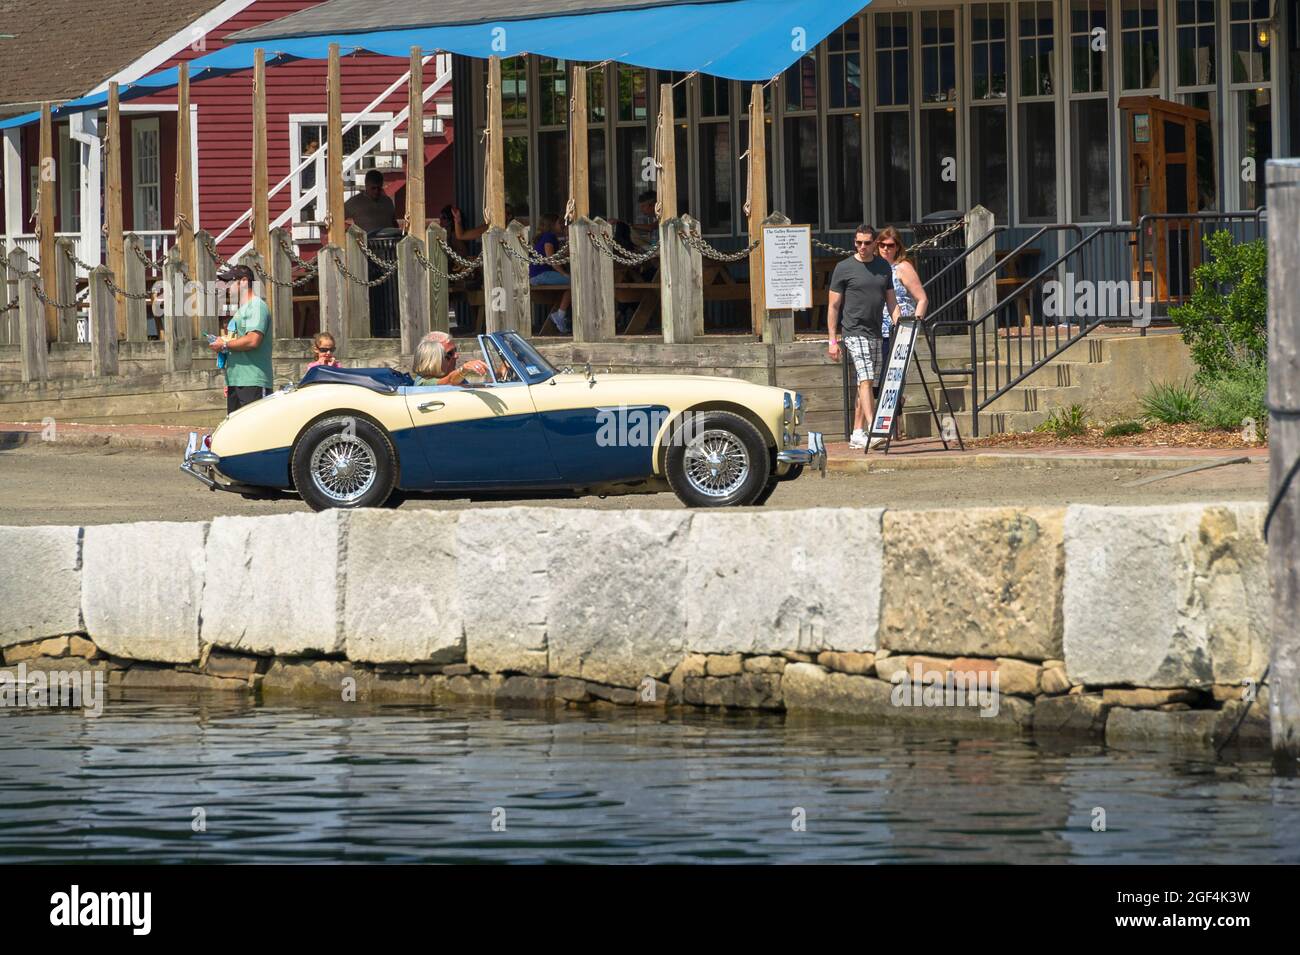 Mystic, CT USA / July 23, 2011: Classic Cream Over Blue Austin Healey 3000 Mk II convertible sports car at waterside British Car Show in New England. Stock Photo